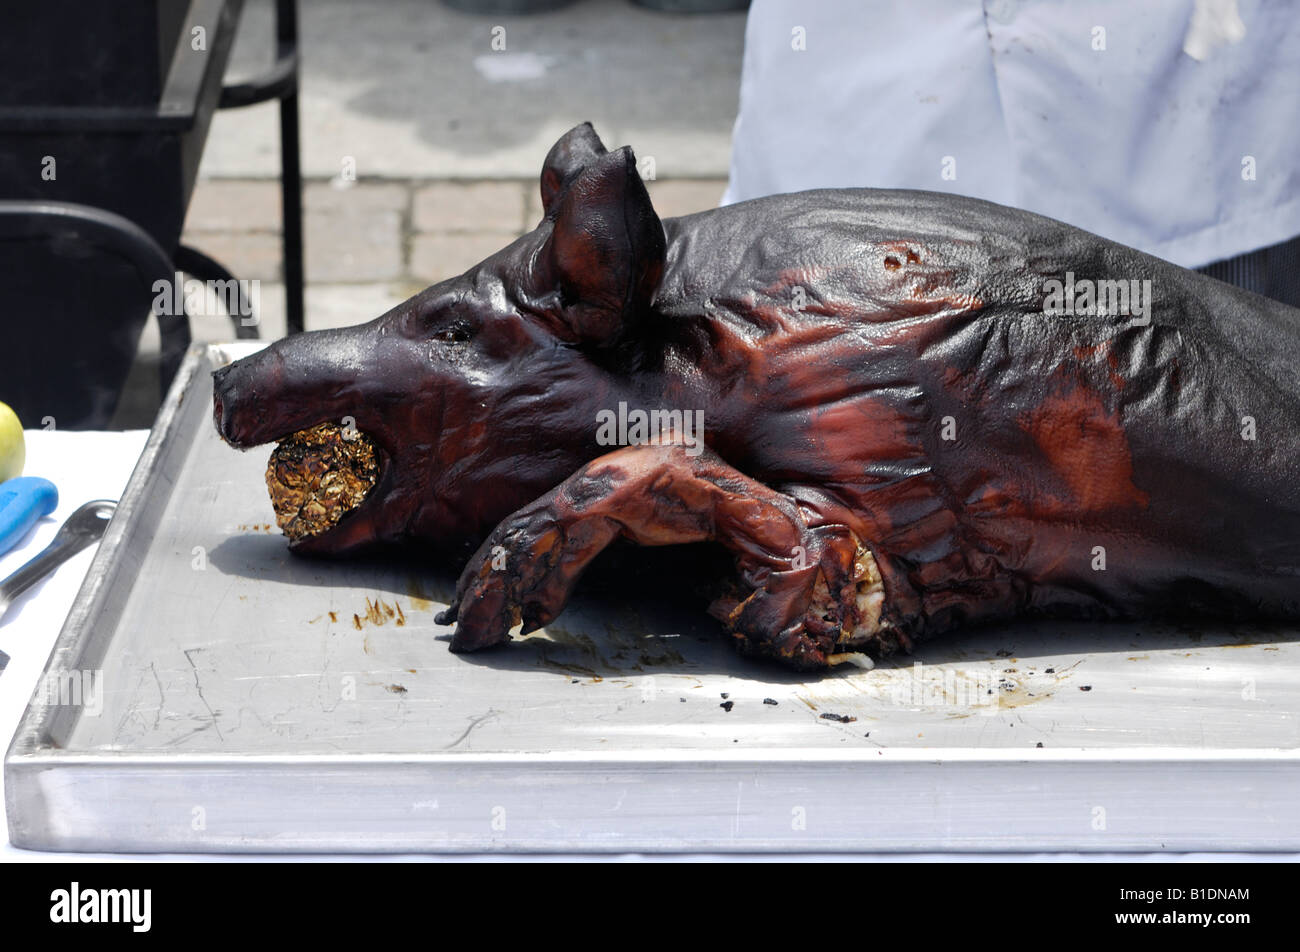 Roasted pig on a tray Stock Photo